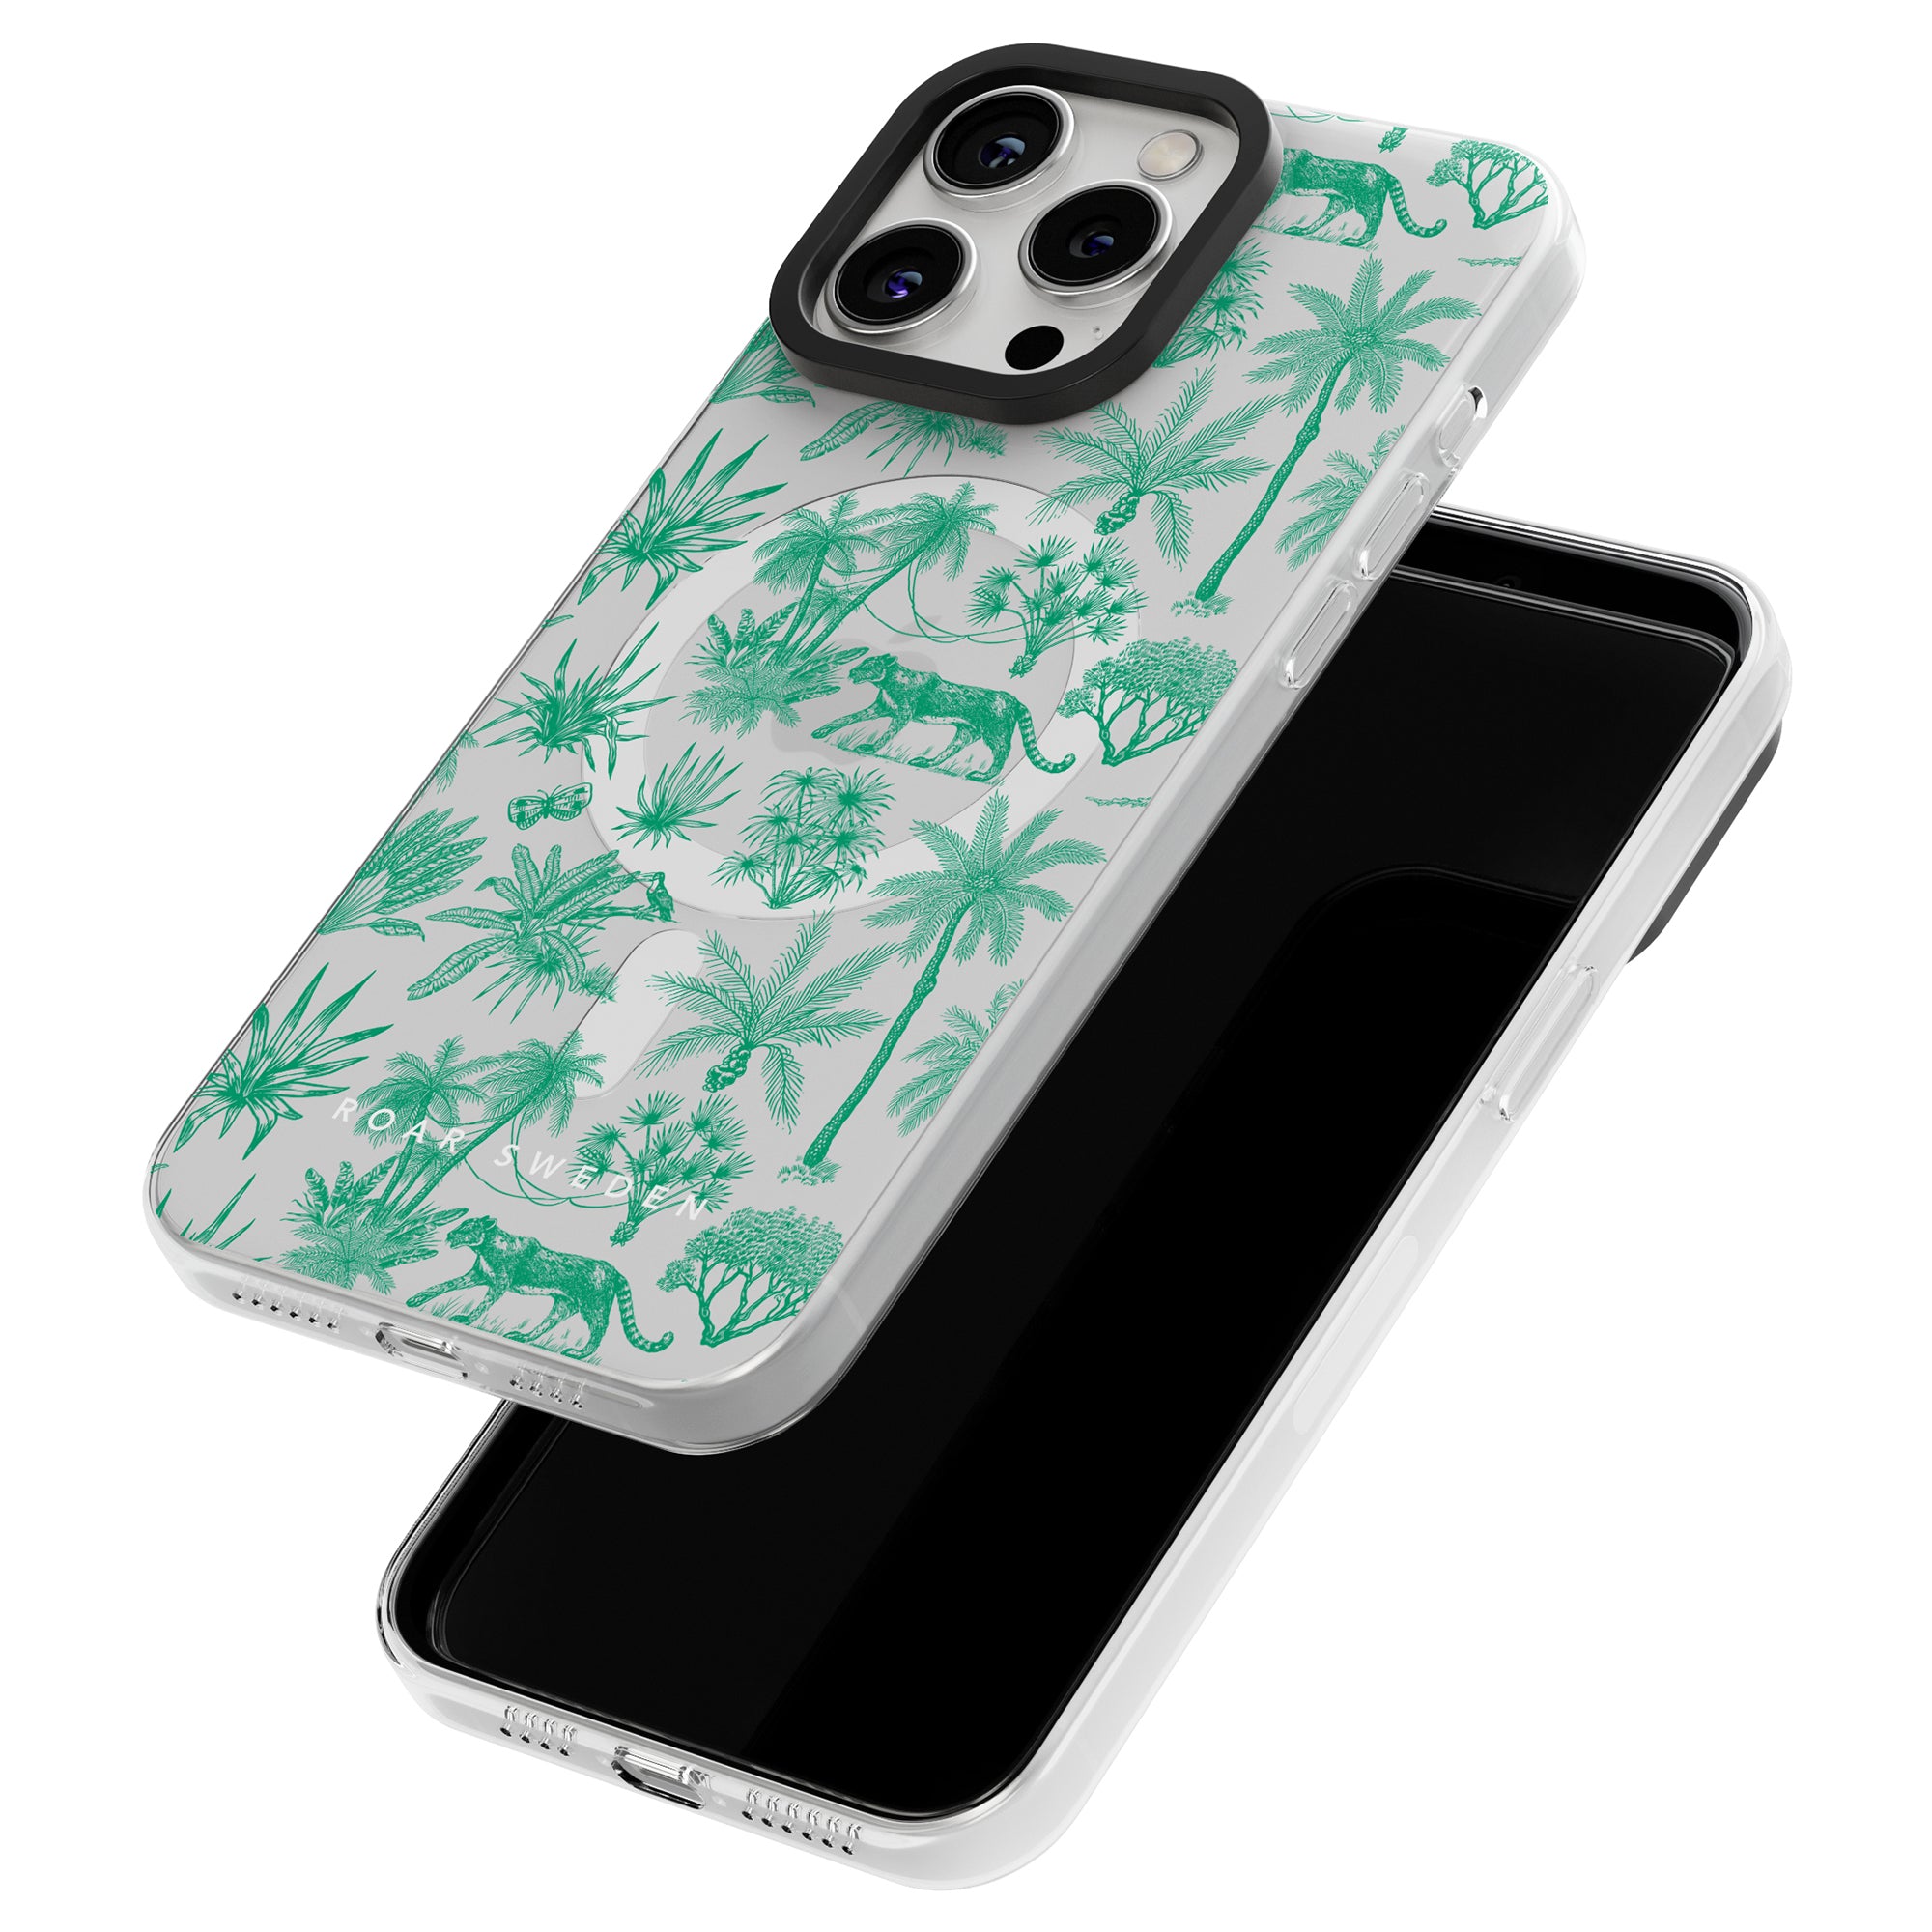 Two smartphones with identical jungle-themed green and white Toile De Jouy Mint - MagSafe cases featuring palm trees and wild animals. One phone is face up, showing the intricate case design, while the other is face down, displaying the screen with MagSafe compatibility.